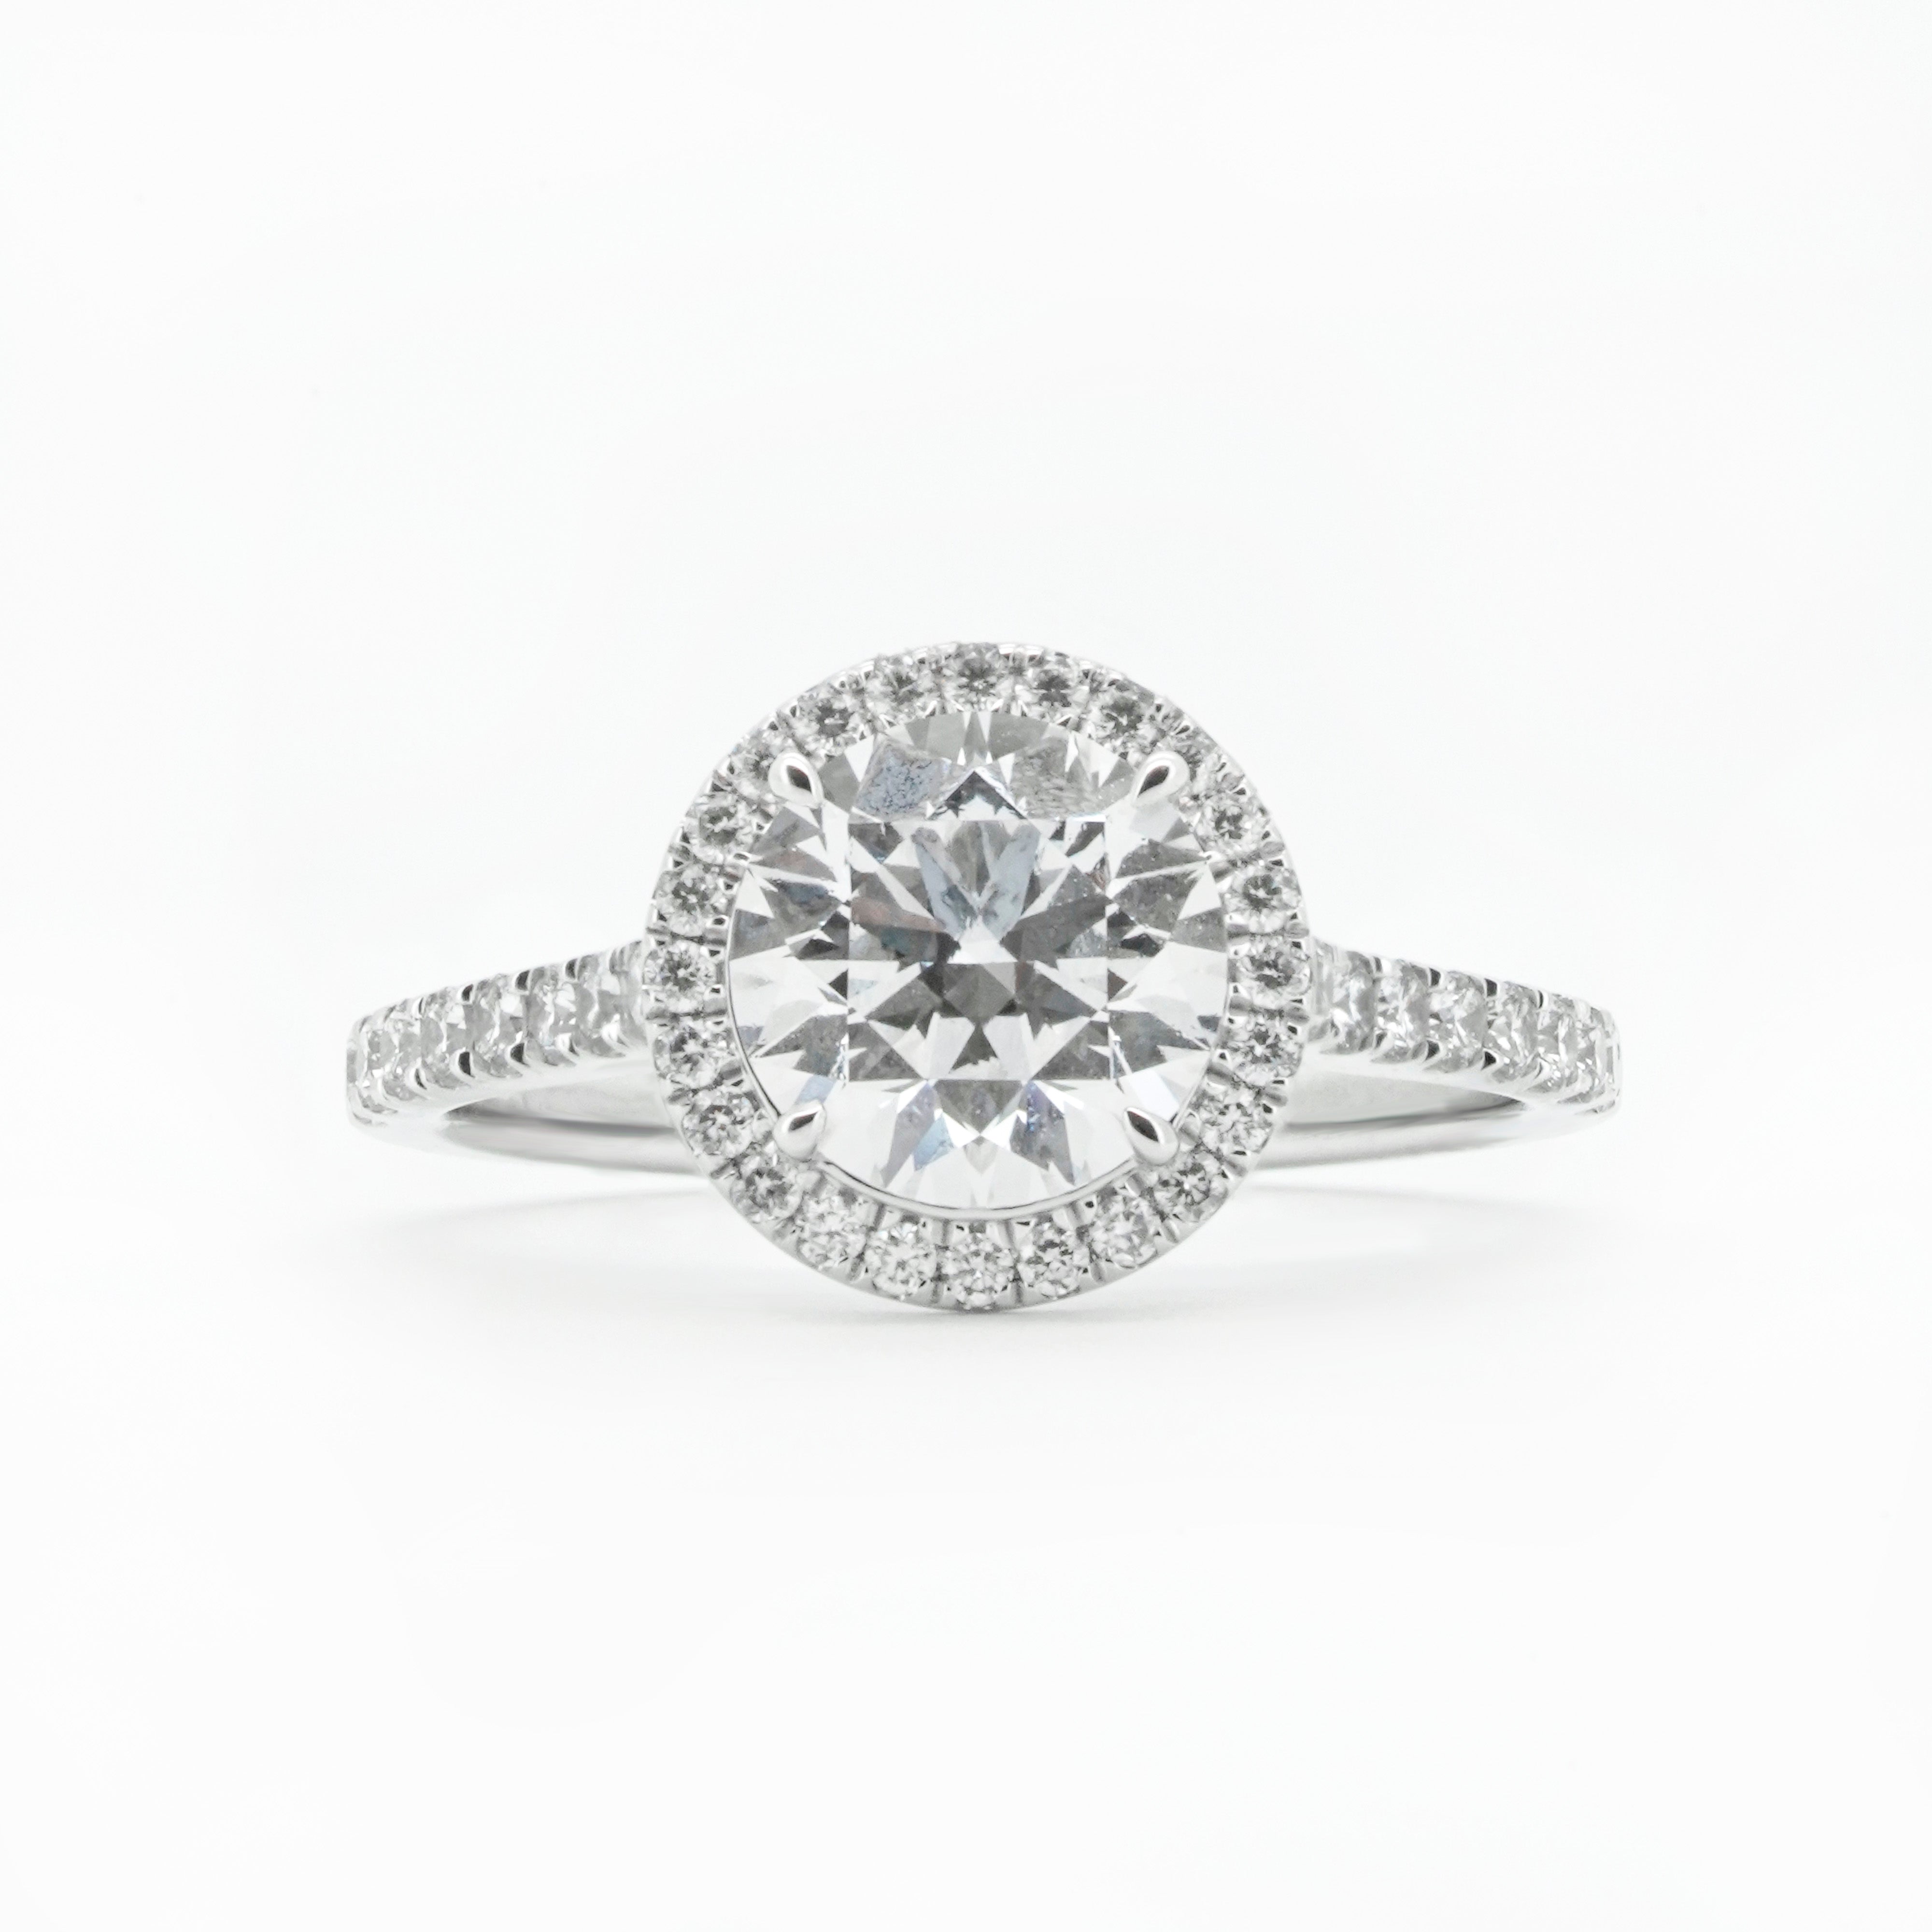 Classsic Round Diamond Ring with Halo and High Bridge | Sol et Terre